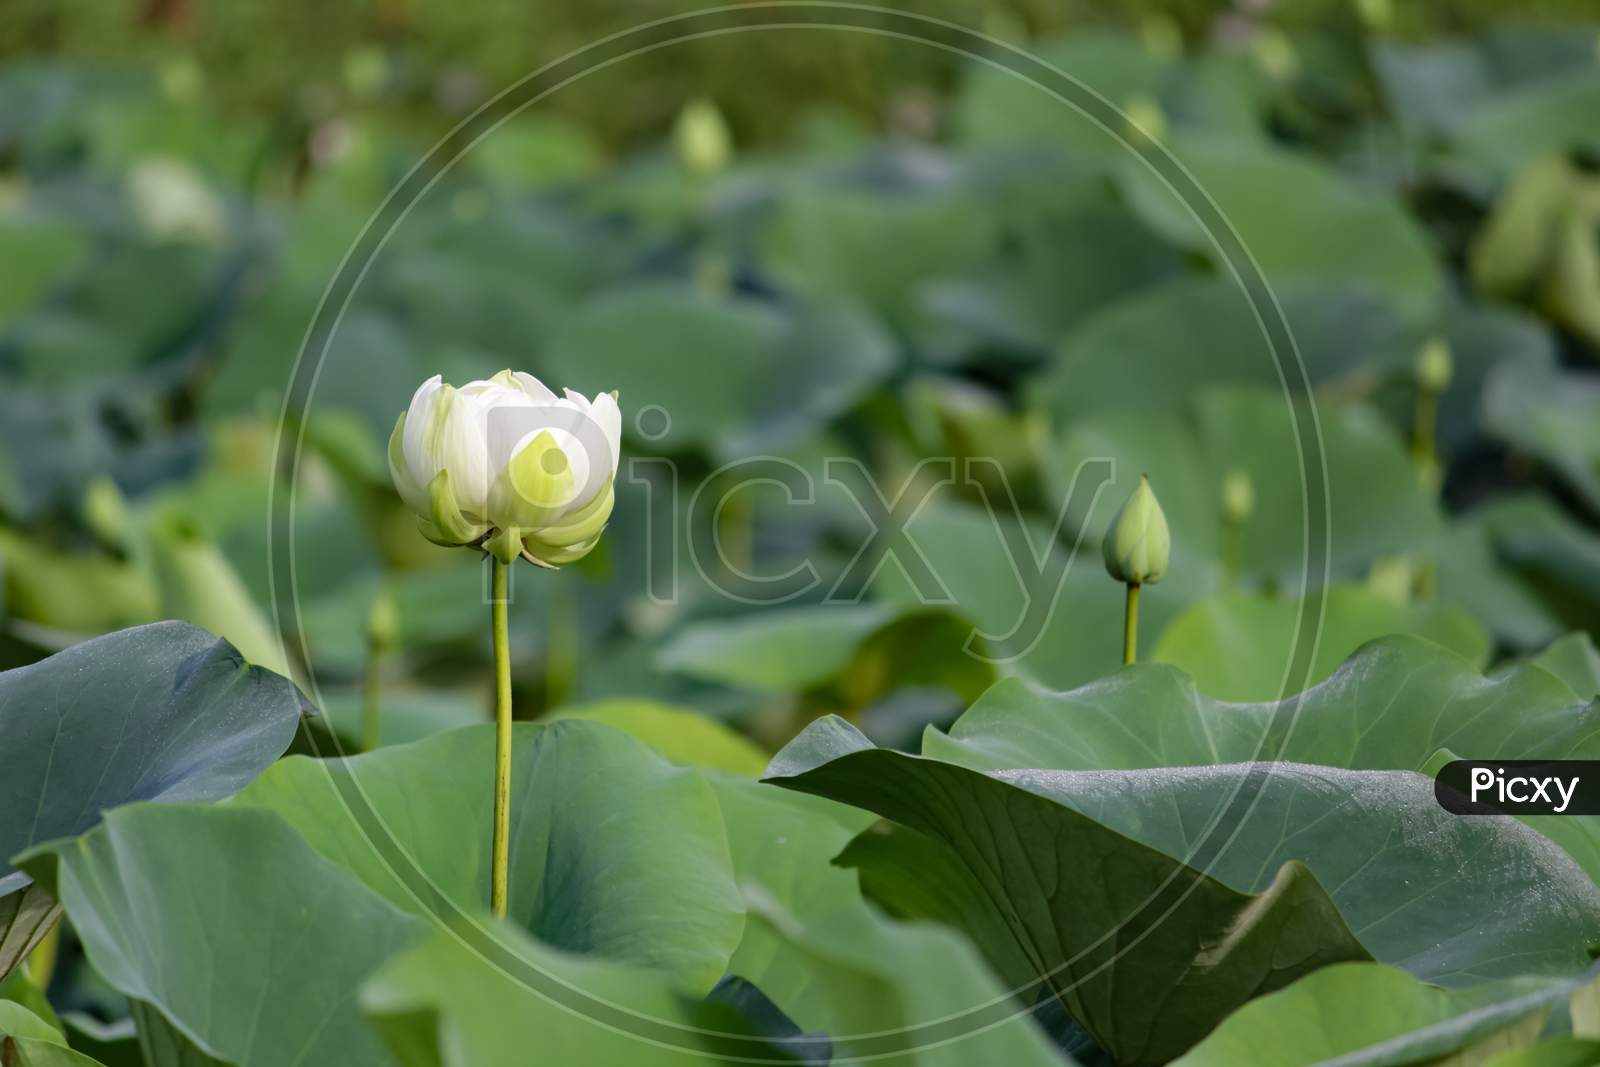 White Lotus Flower In Pond With Leaves And Buds In Background